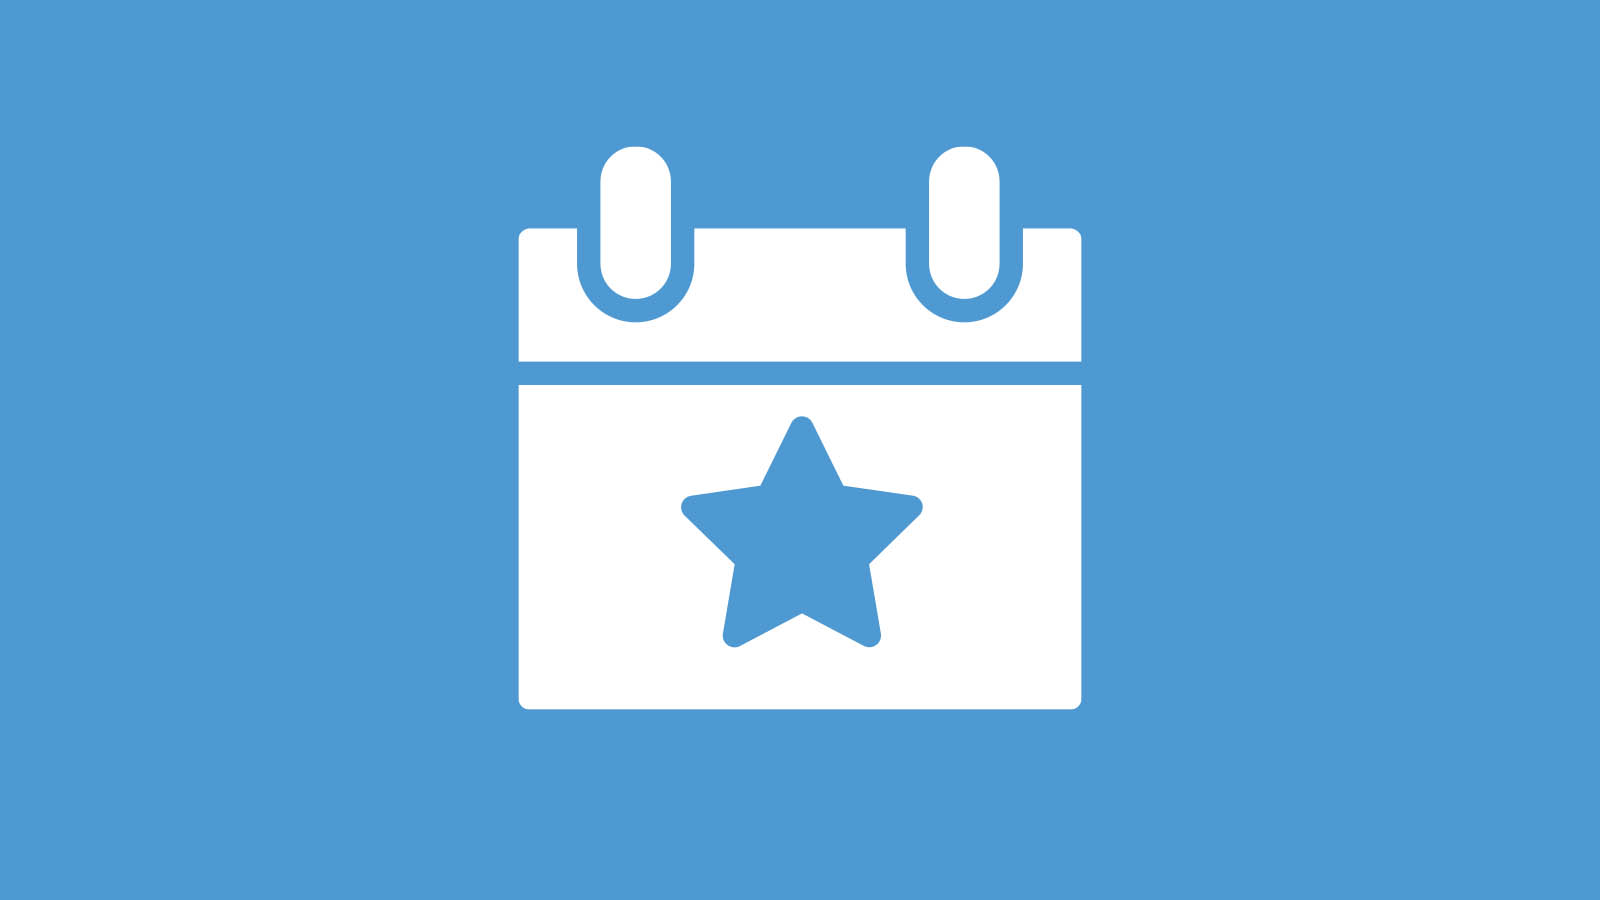 Icon representing a calendar event on a blue background